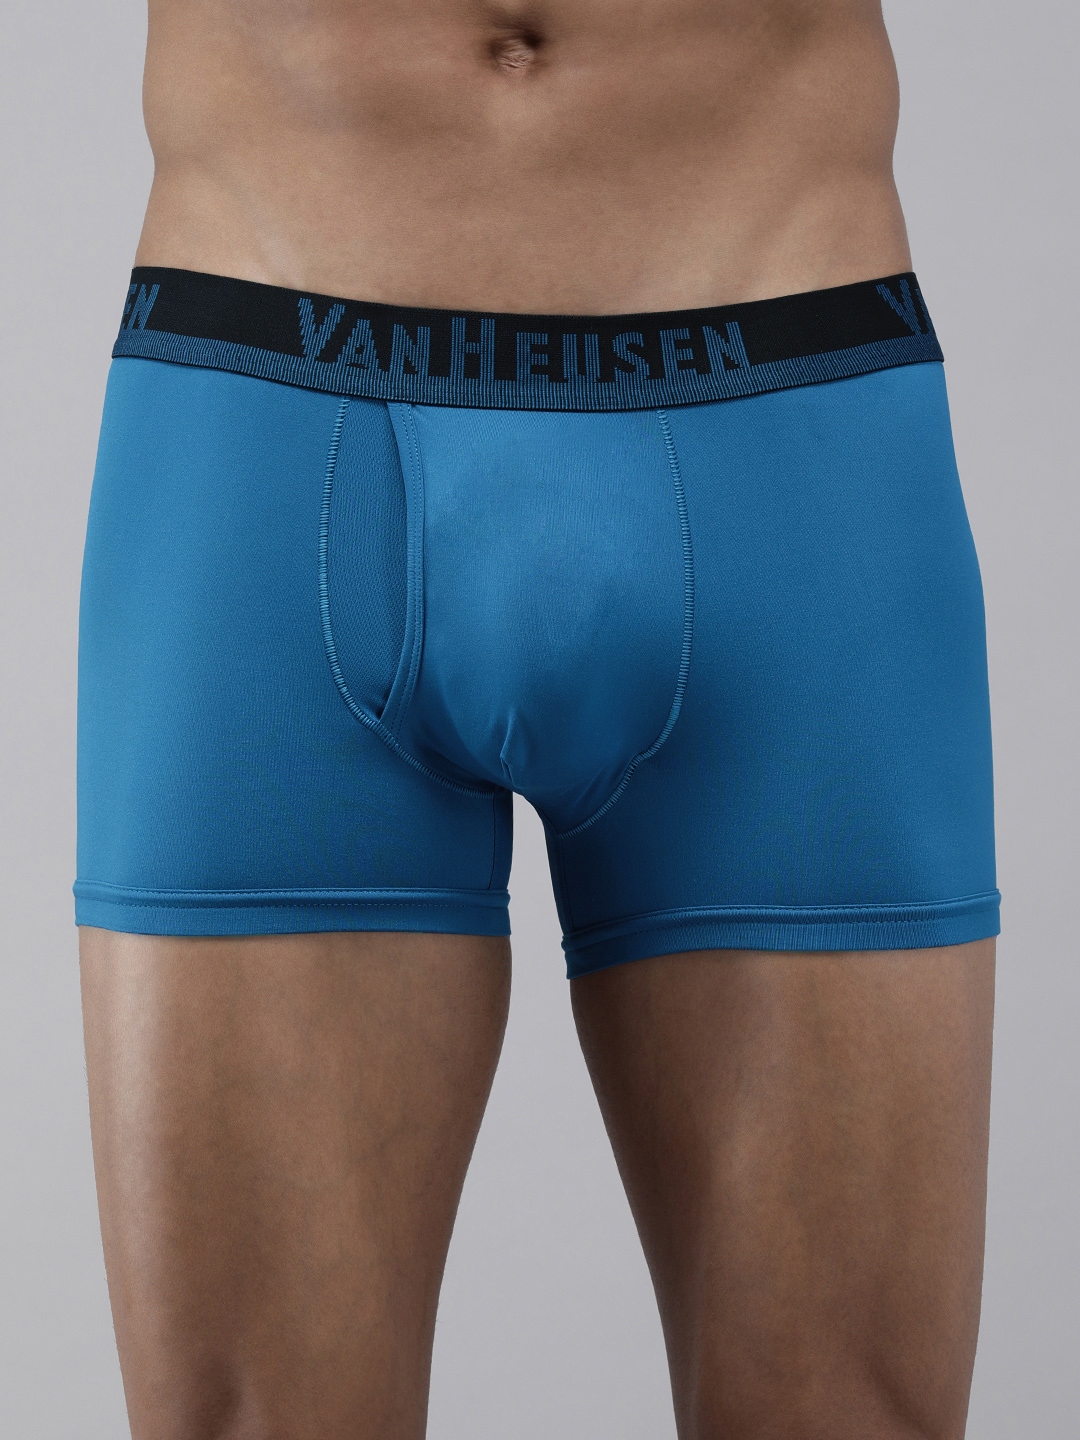 Bummer Underwear Unboxing and Review, Bummer Trunks Review, Men's Trunks  Review